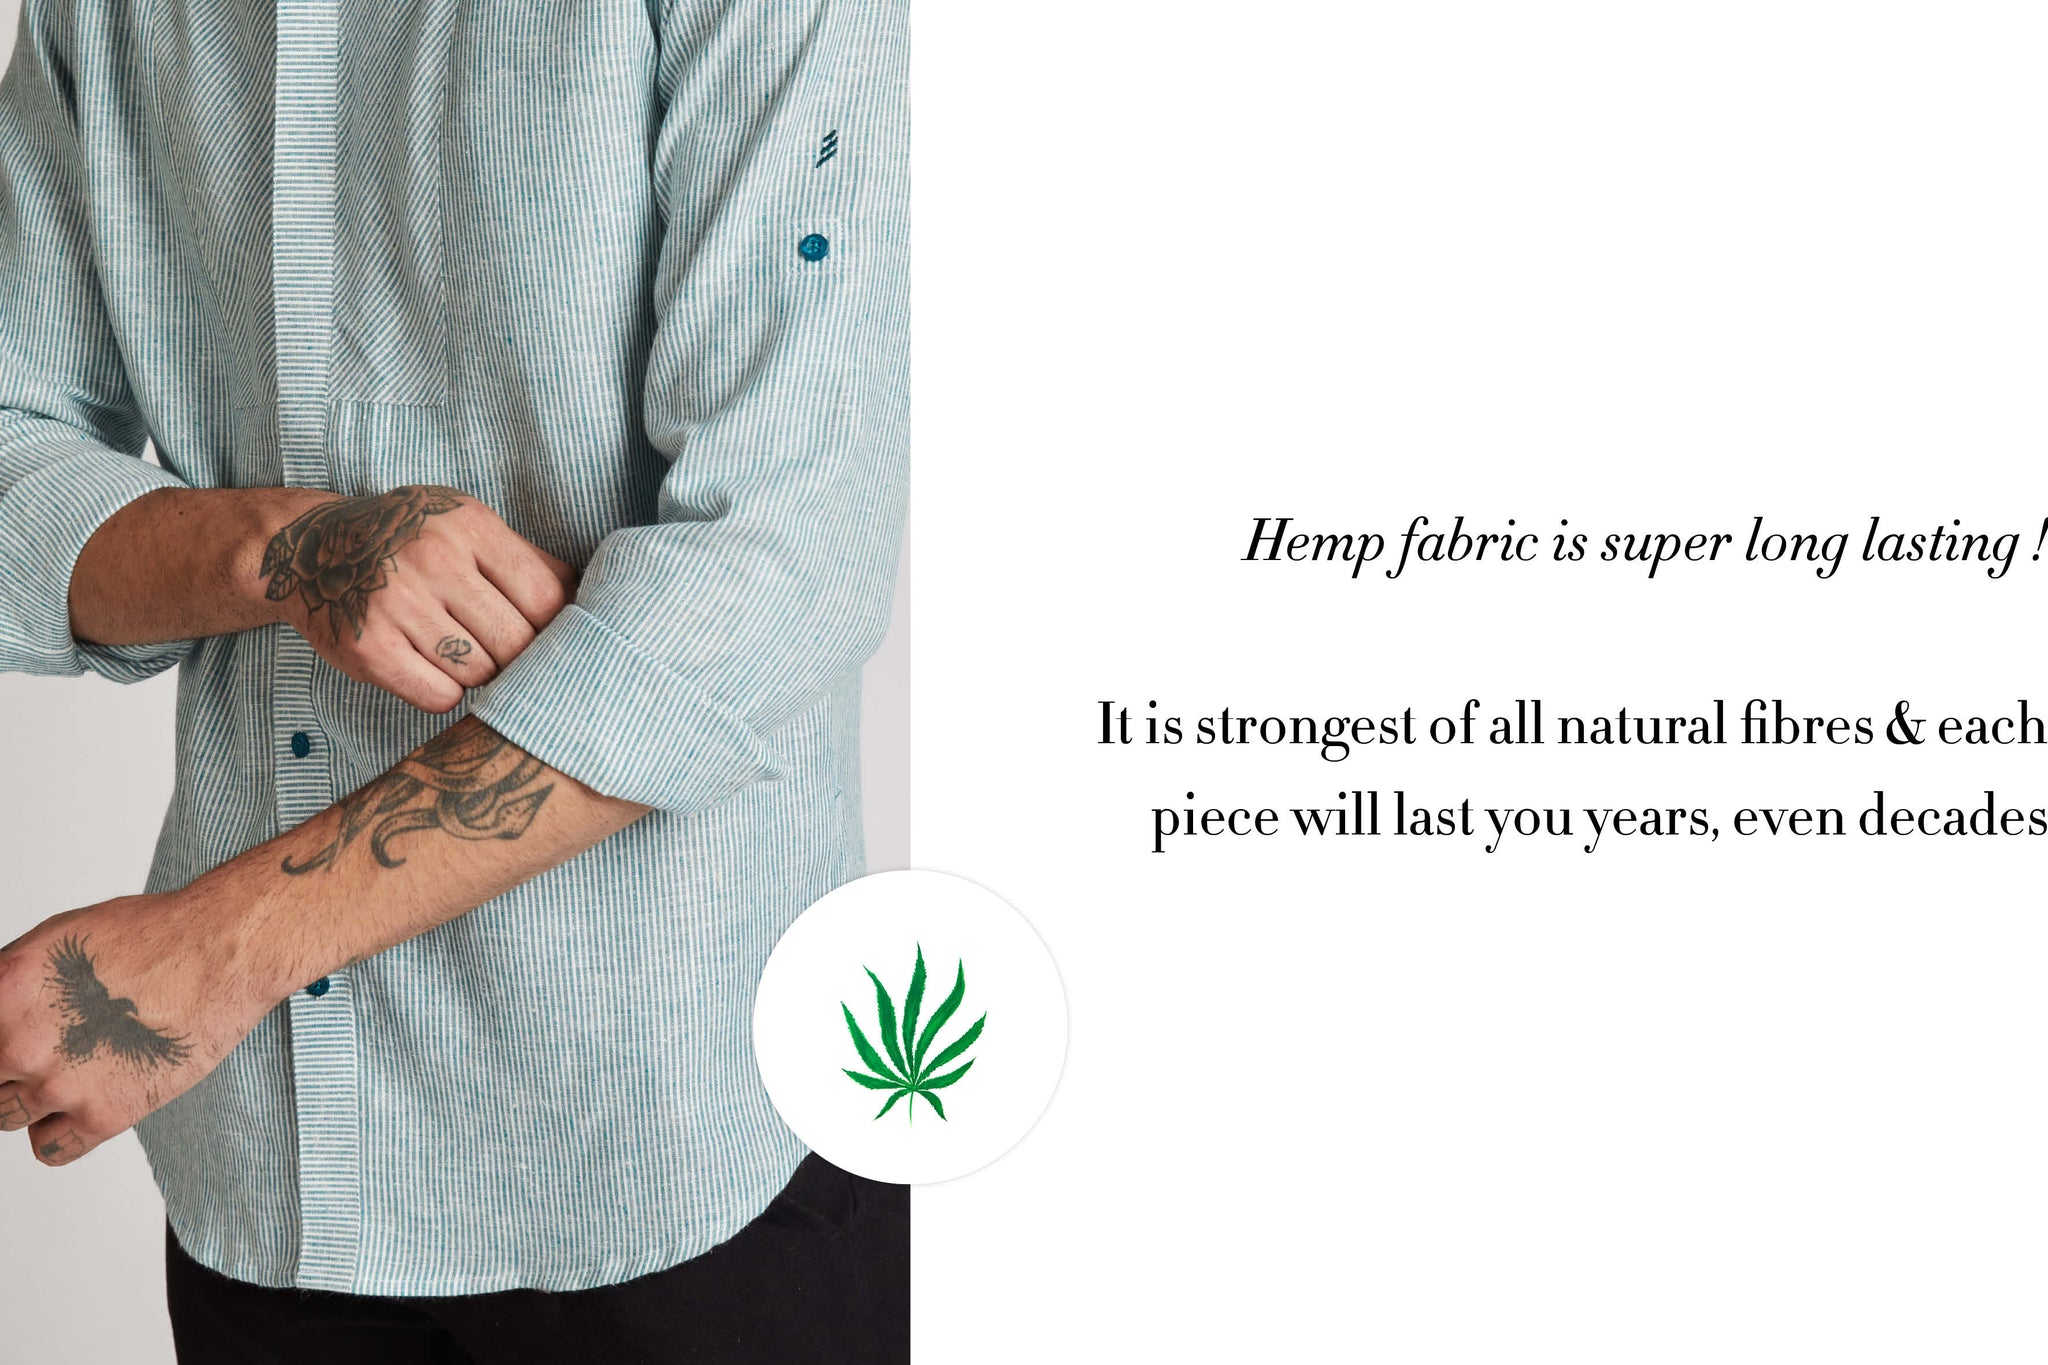 Hemp Fabric is super long lasting . Its the strongest of all natural fibres and each piece will last you years  , even decades